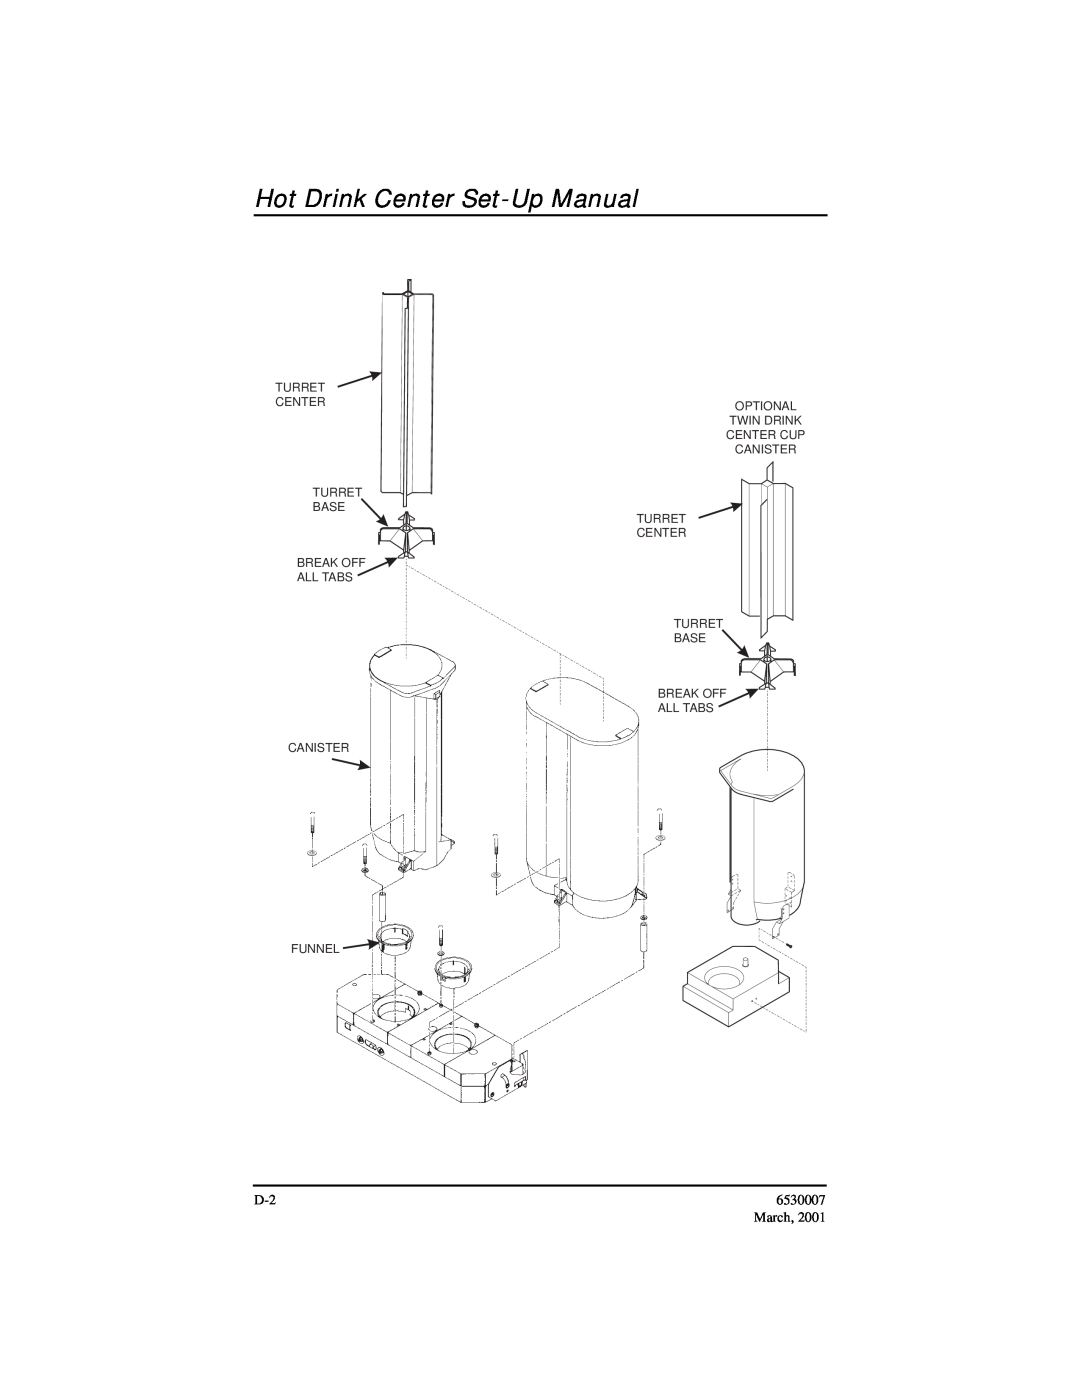 Crane Merchandising Systems 6530006 manual Hot Drink Center Set-Up Manual, 6530007, March, Break Off All Tabs 